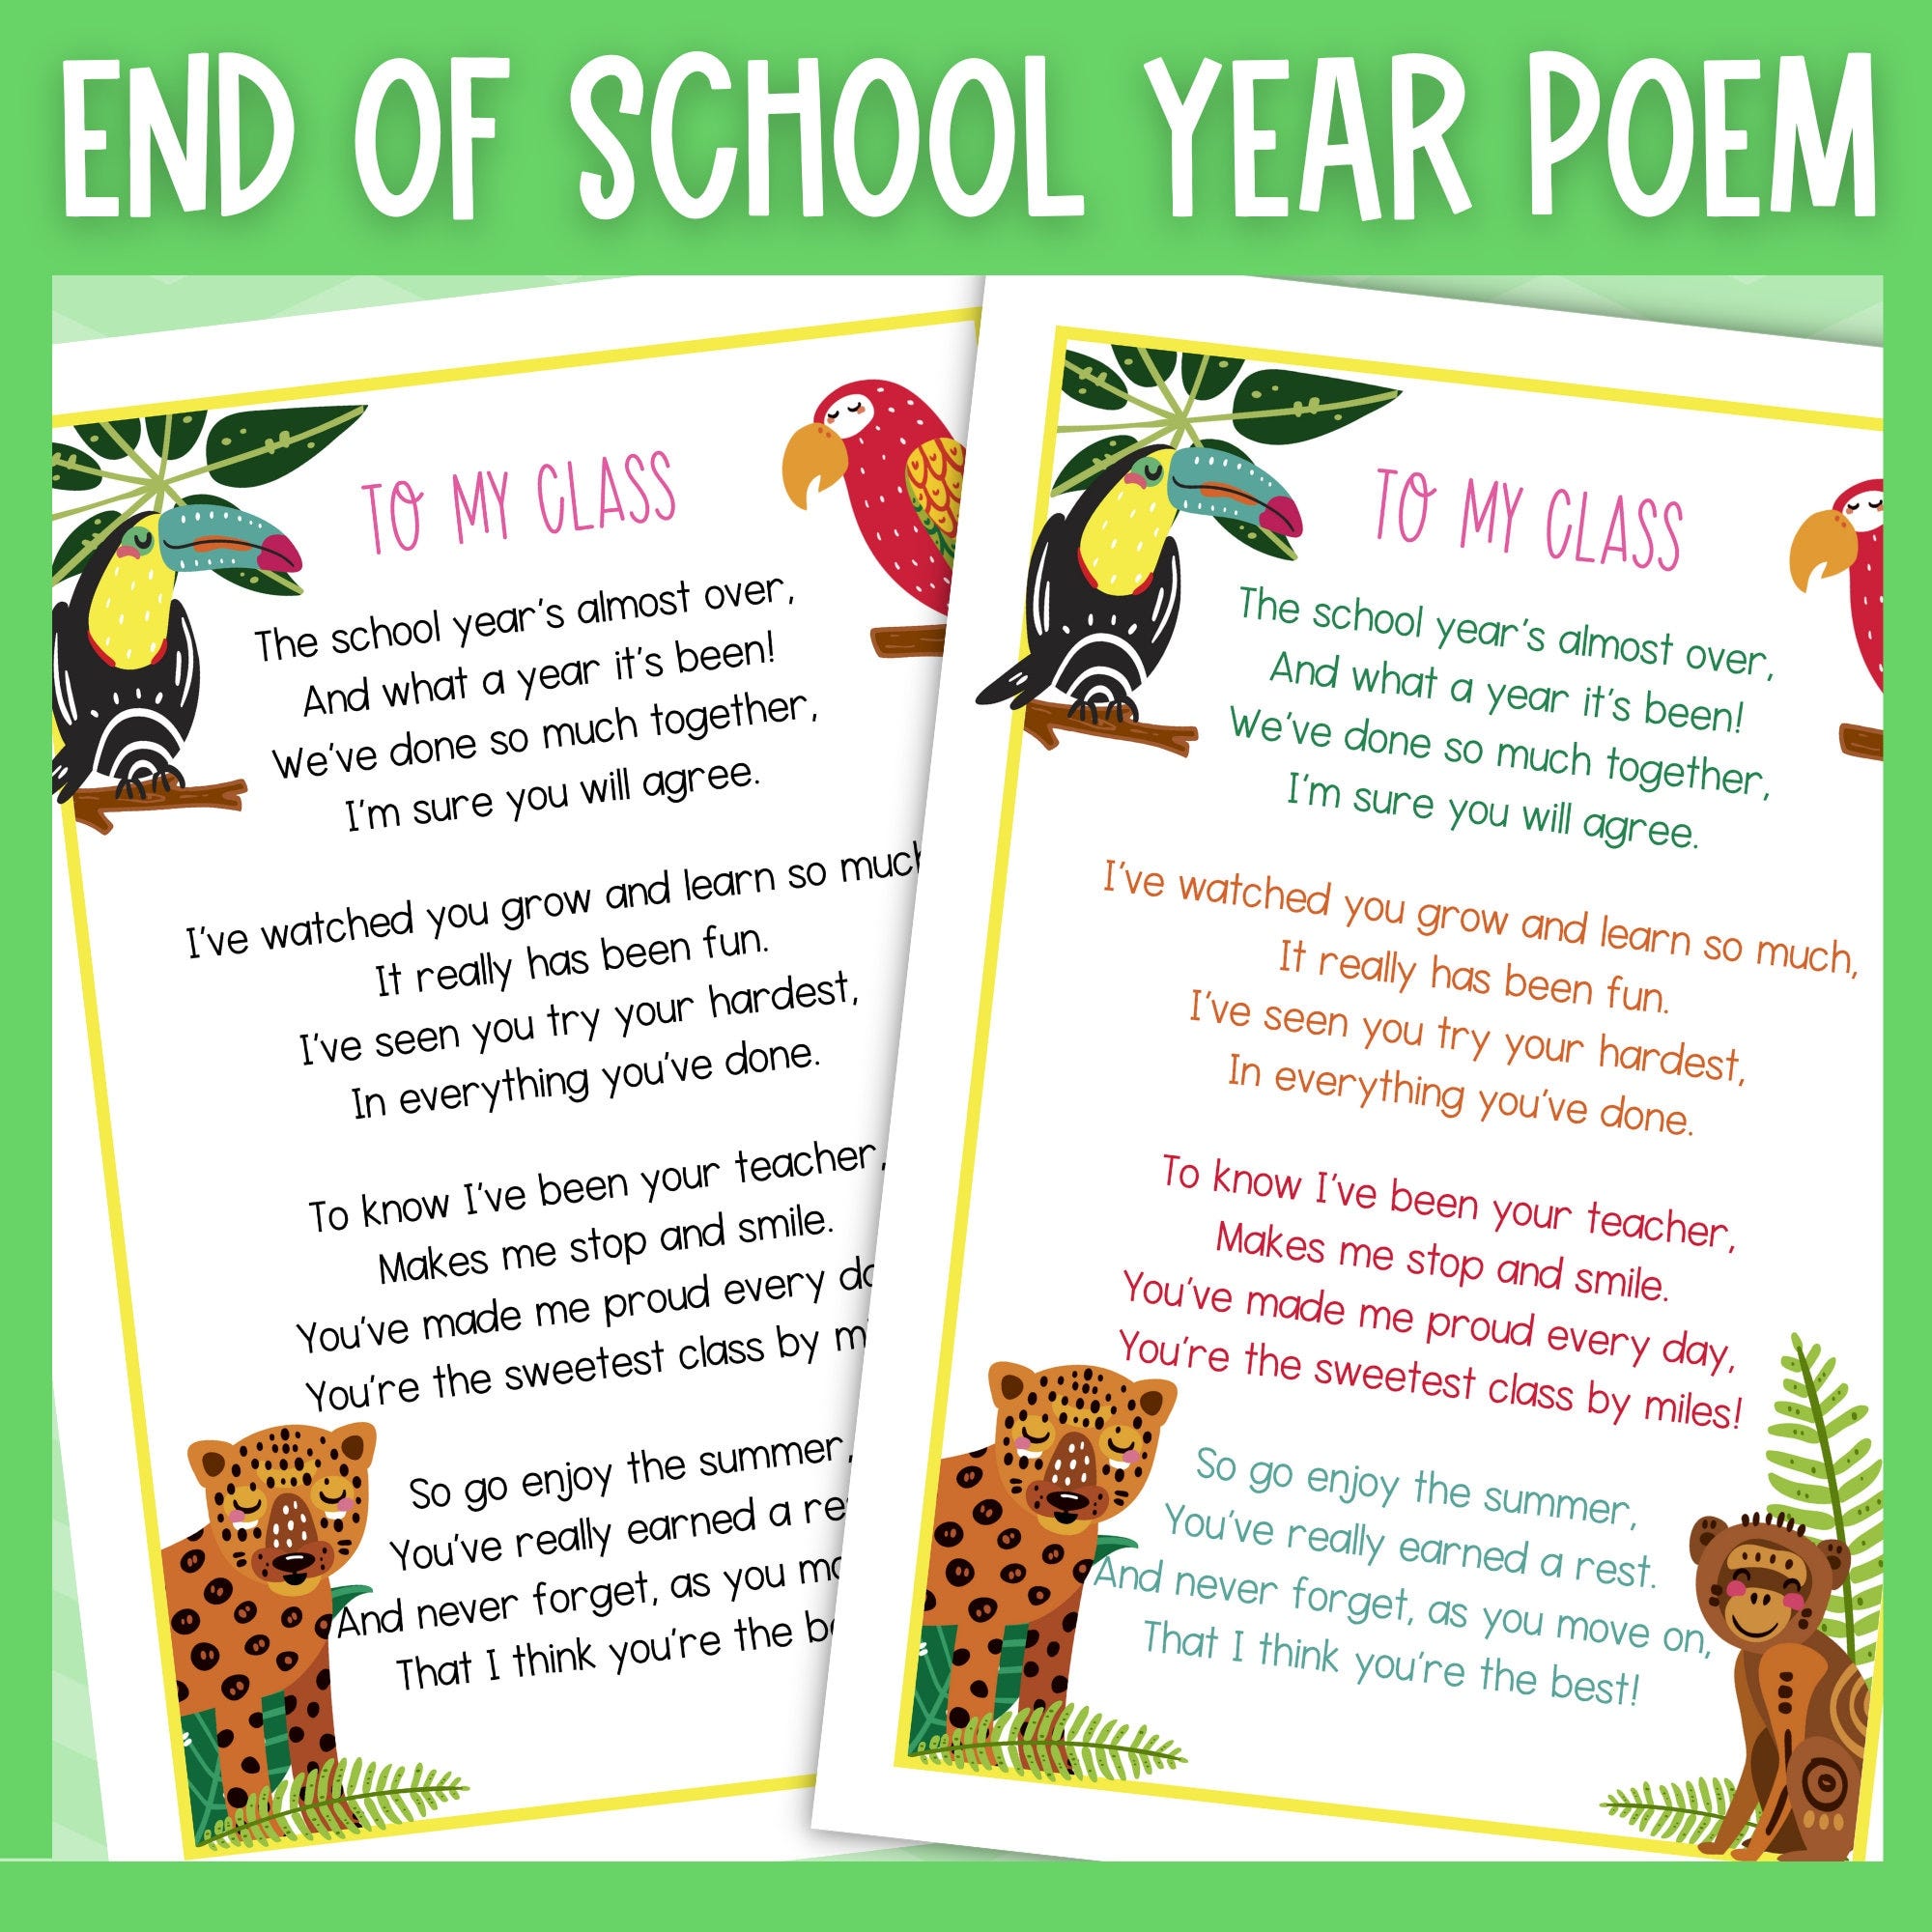 End of school year poem letter from teacher to students pupils class | Printable PDF | jungle animal themed | A4 and 8.5 x 11 inch